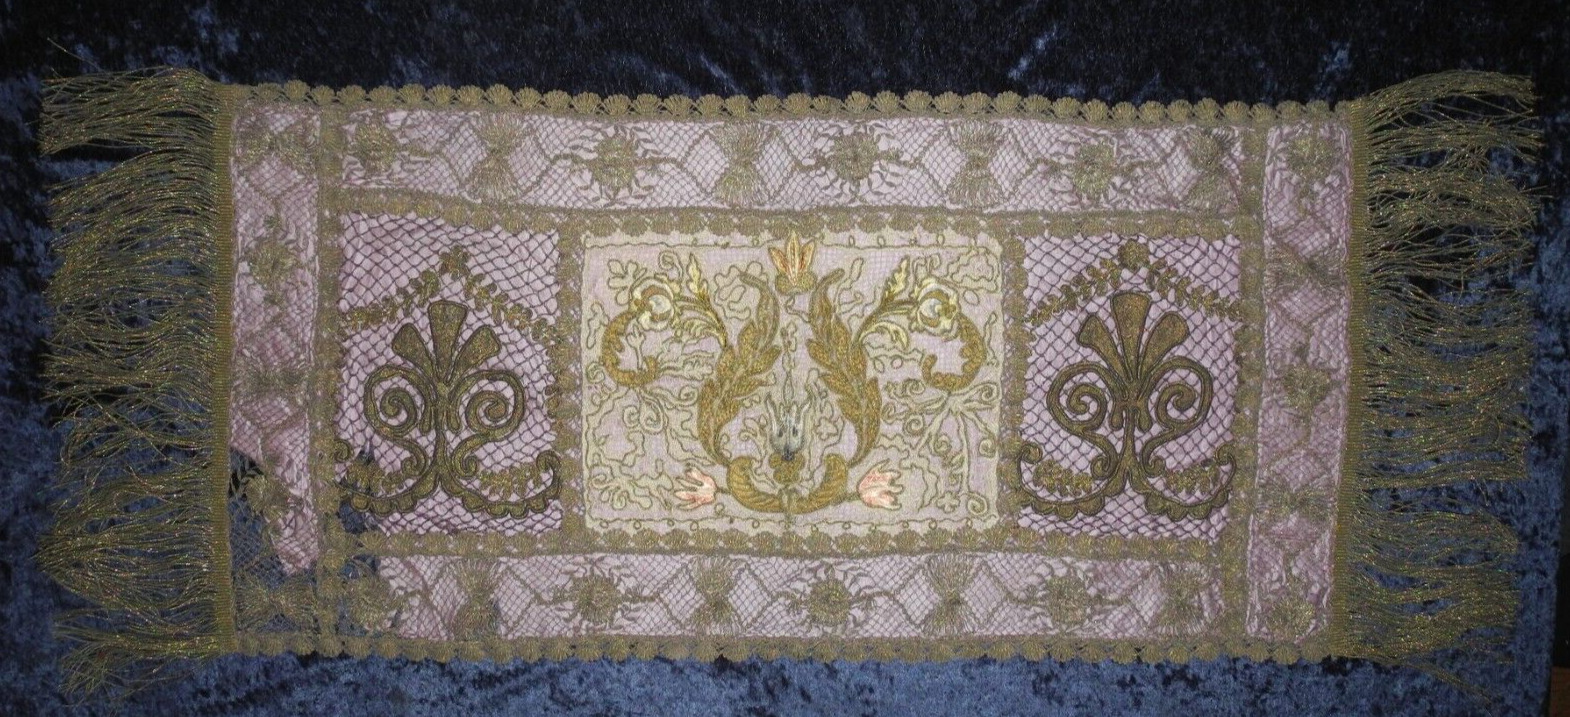 OLD ANTIQUE FRENCH HAND EMBROIDERED LACE GOLD SILVER THREAD BROCADE ALTAR CLOTH